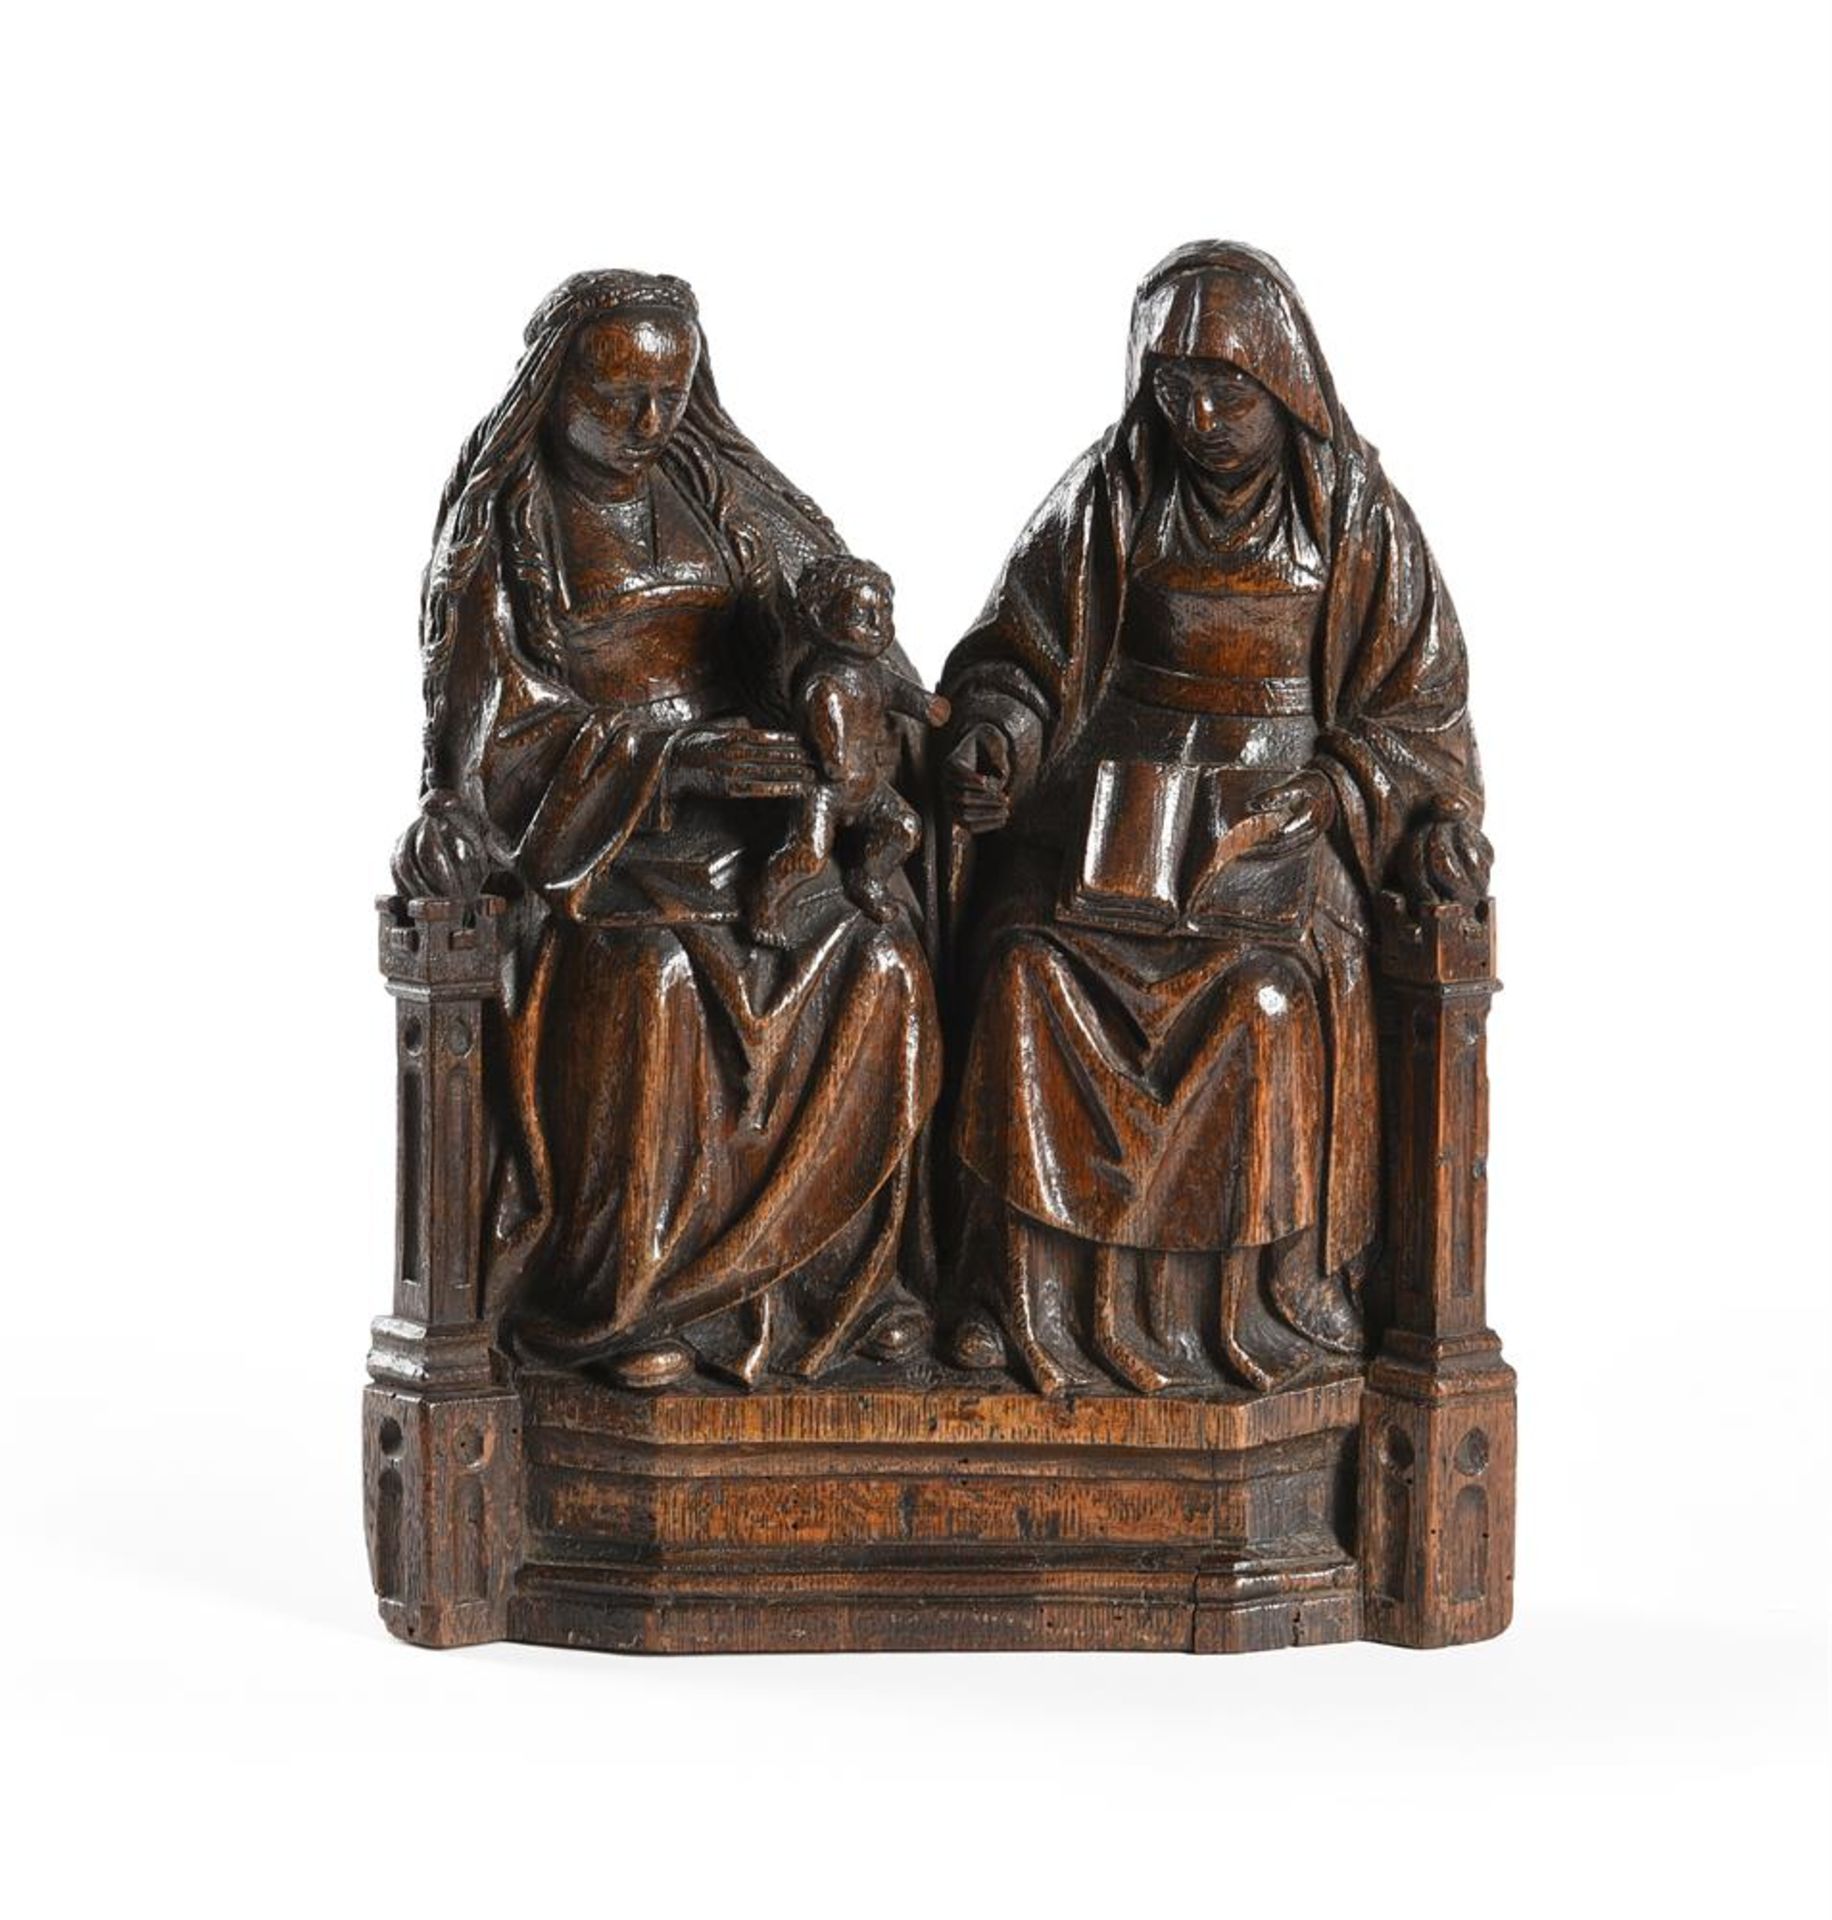 A CARVED OAK GROUP OF THE VIRGIN AND CHILD WITH SAINT ANNE 'ANNA SELBDRITT', ANTWERP